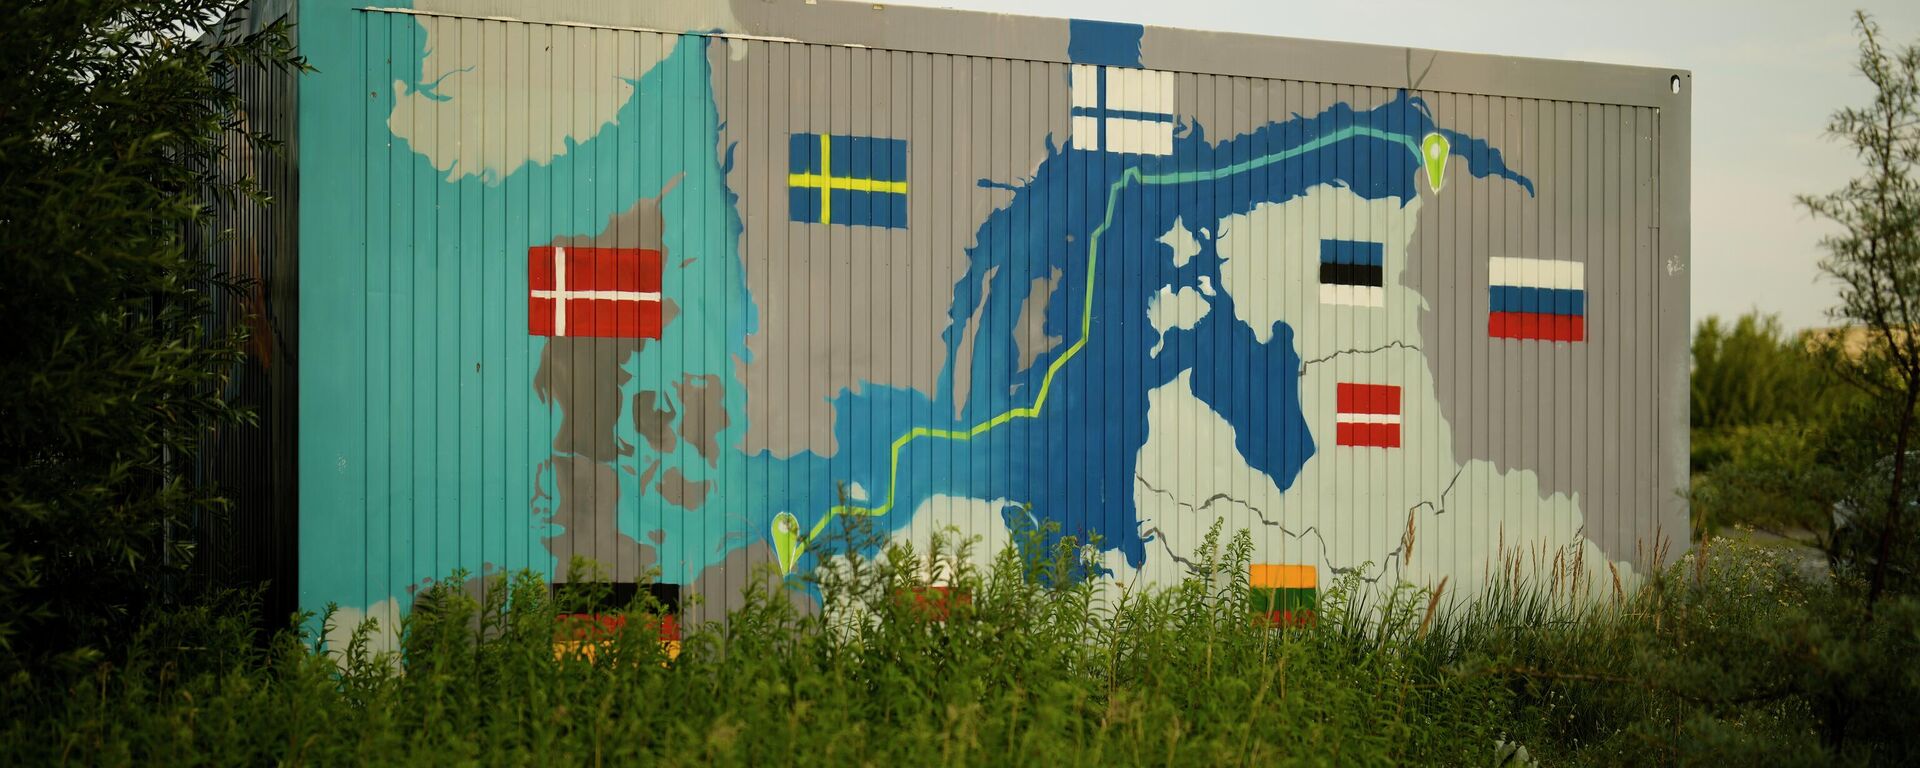 A painting showing the Nord Stream pipelines is displayed on a container near the Nord Stream 1 Baltic Sea pipeline in Lubmin, Germany, Wednesday, July 20, 2022 - Sputnik International, 1920, 31.08.2022